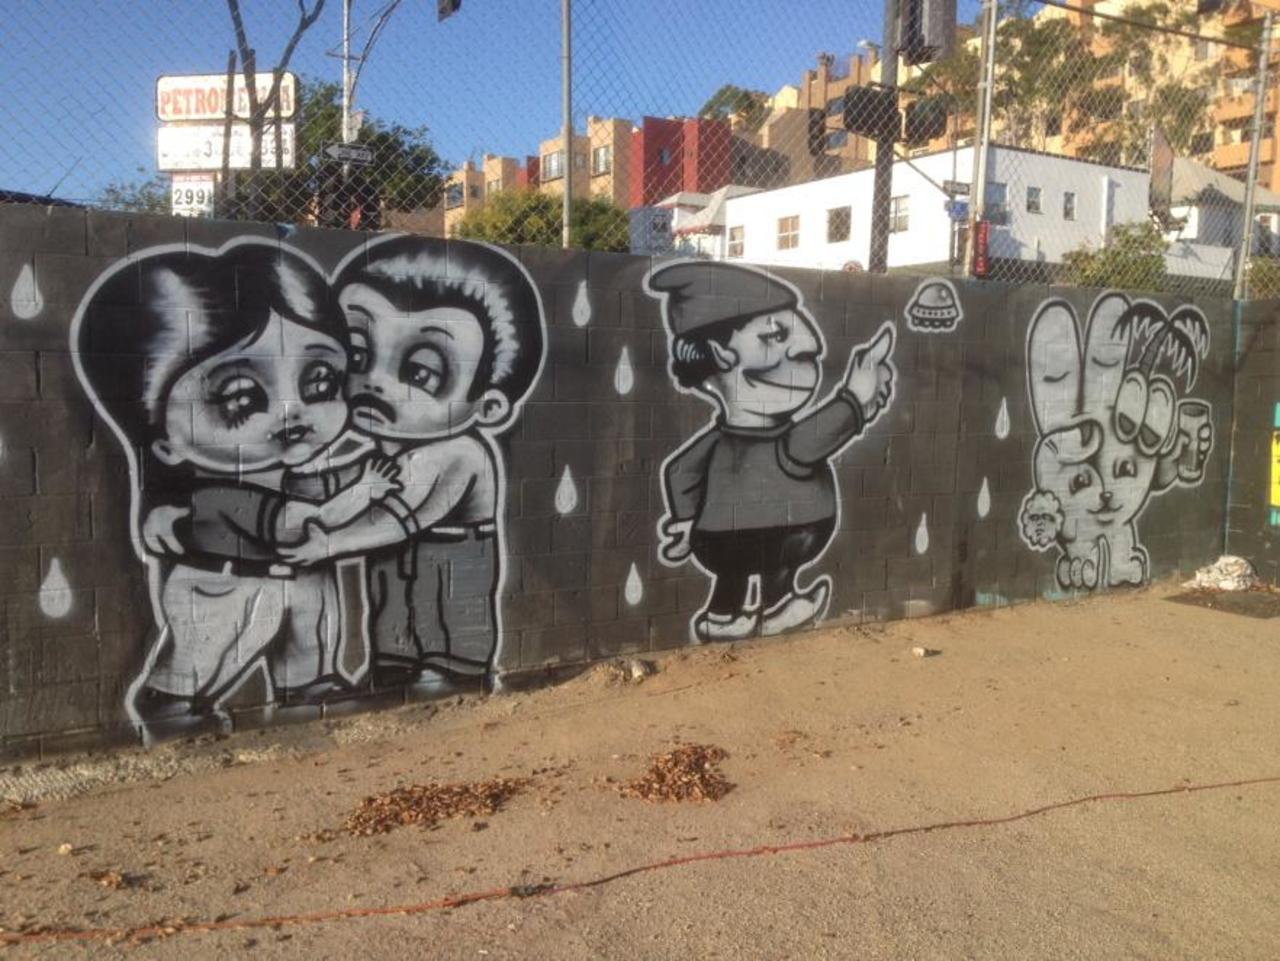 RT @boredtwodeath1: These are some characters you spot around #SanDiego. #Streetart #Graffiti photo by me! #graphicdesign http://t.co/XIhpXKPpWa